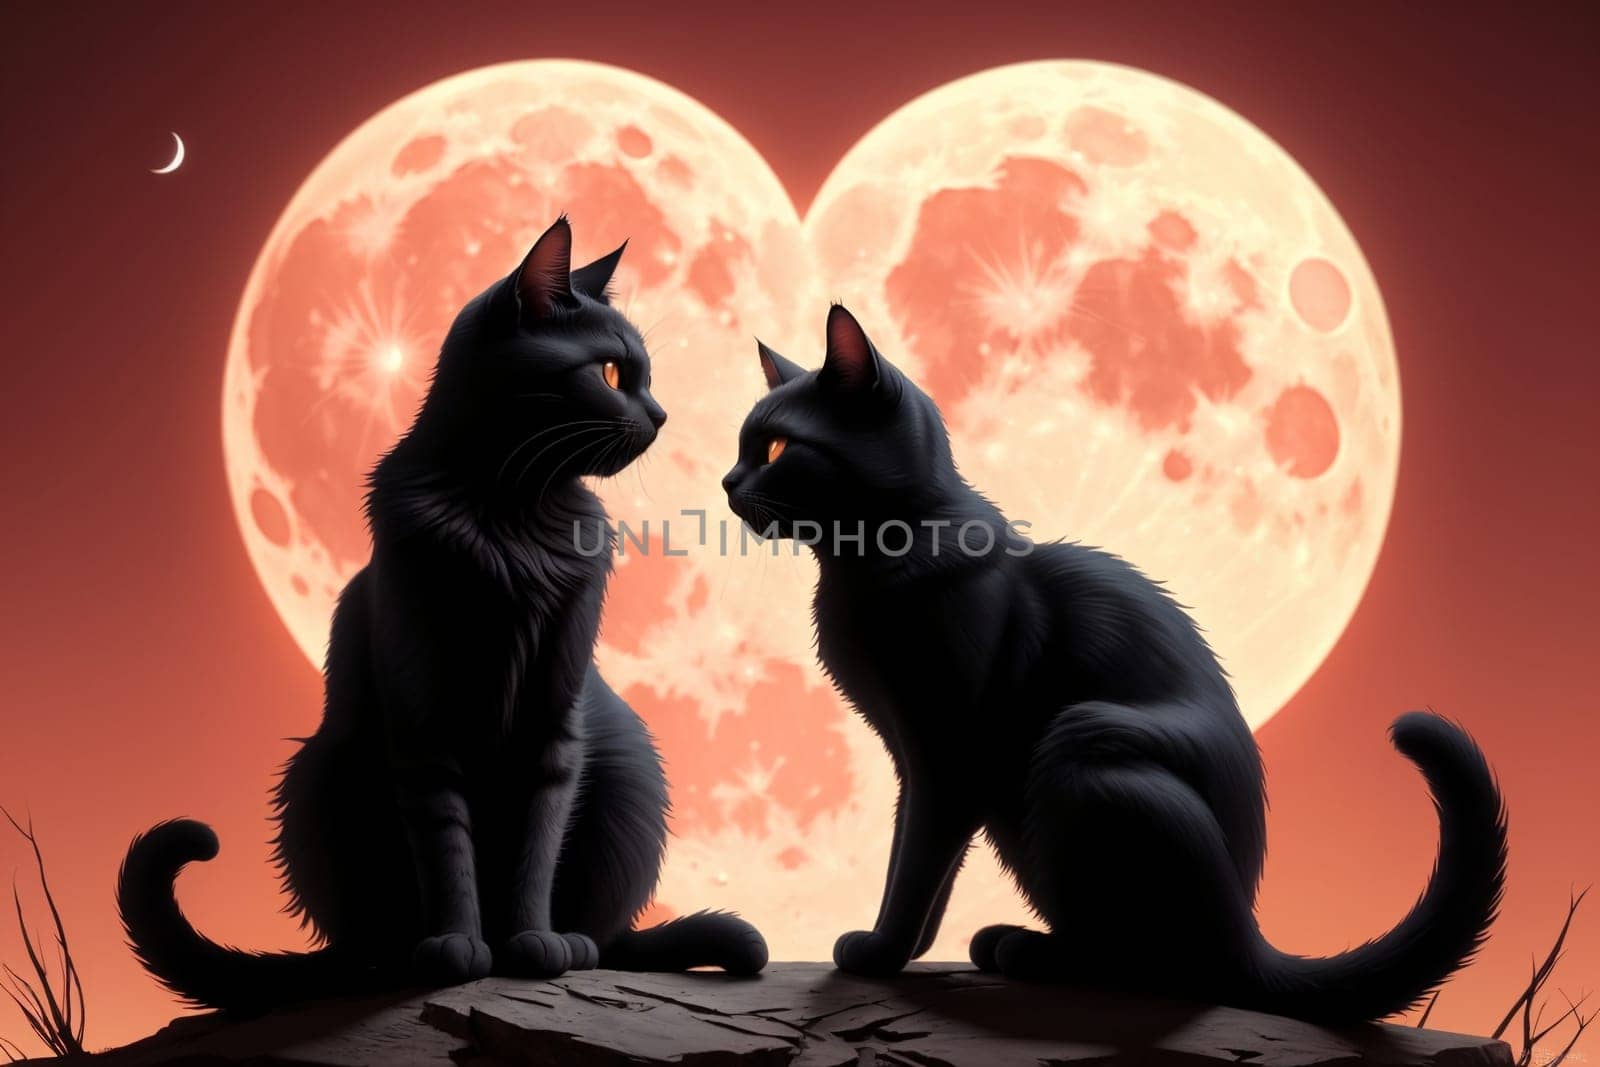 two cats love each other, sit by the moon in the evening, art by Rawlik